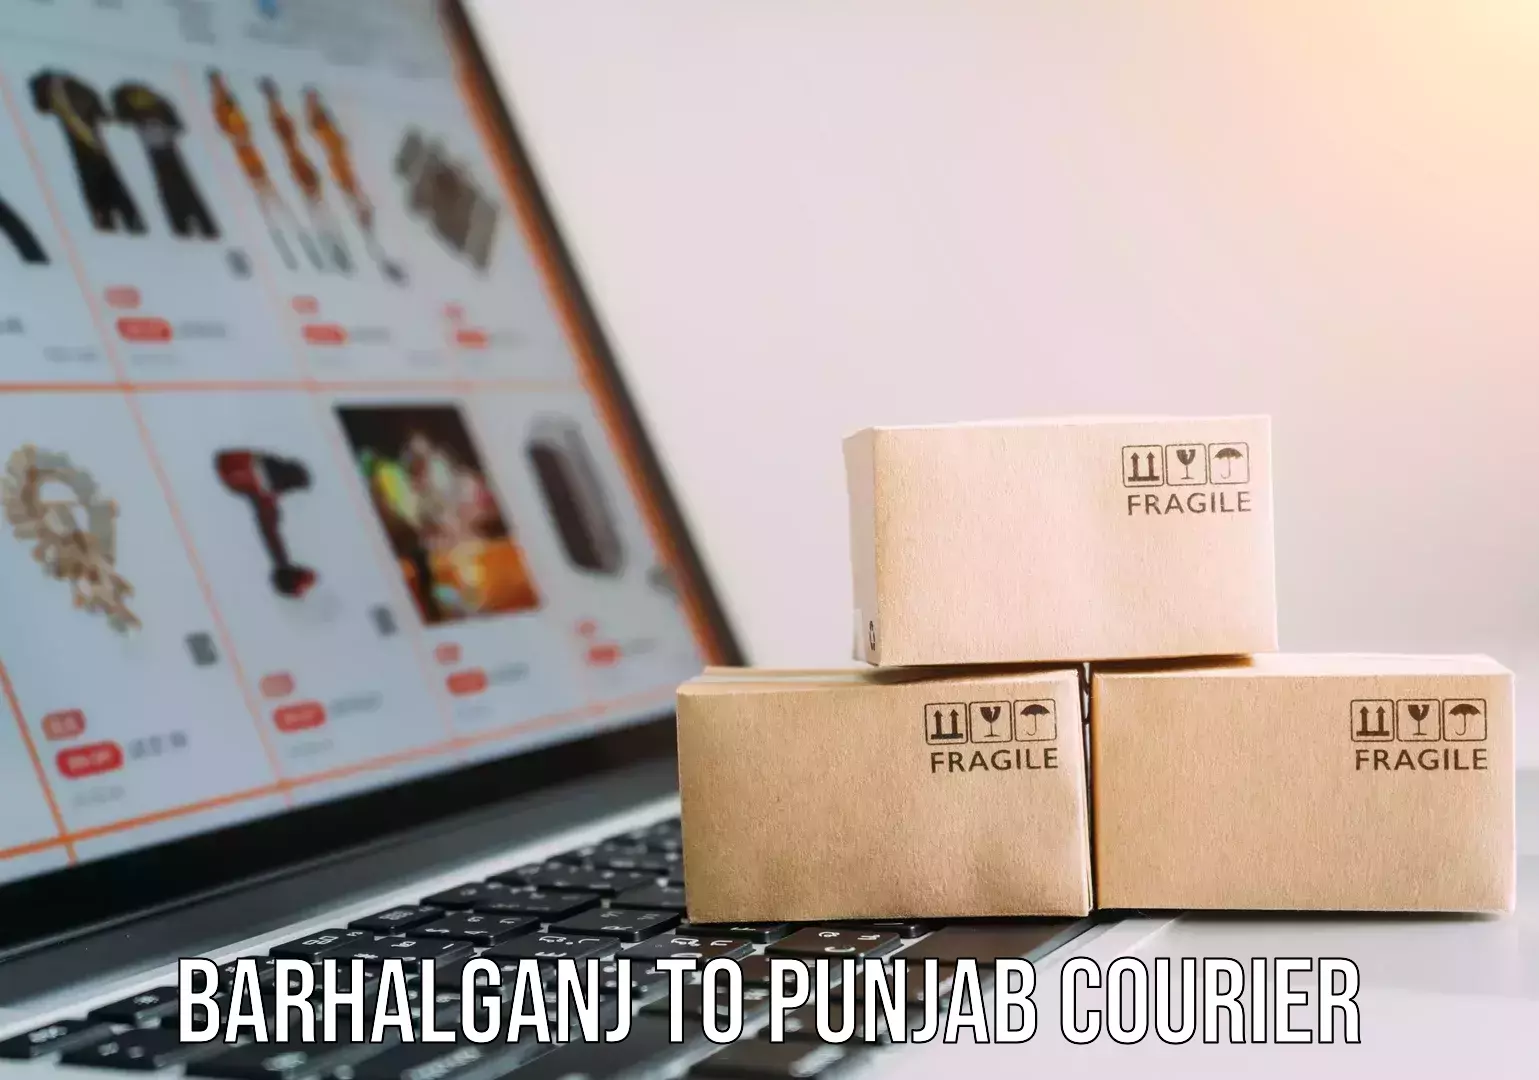 State-of-the-art courier technology Barhalganj to Punjab